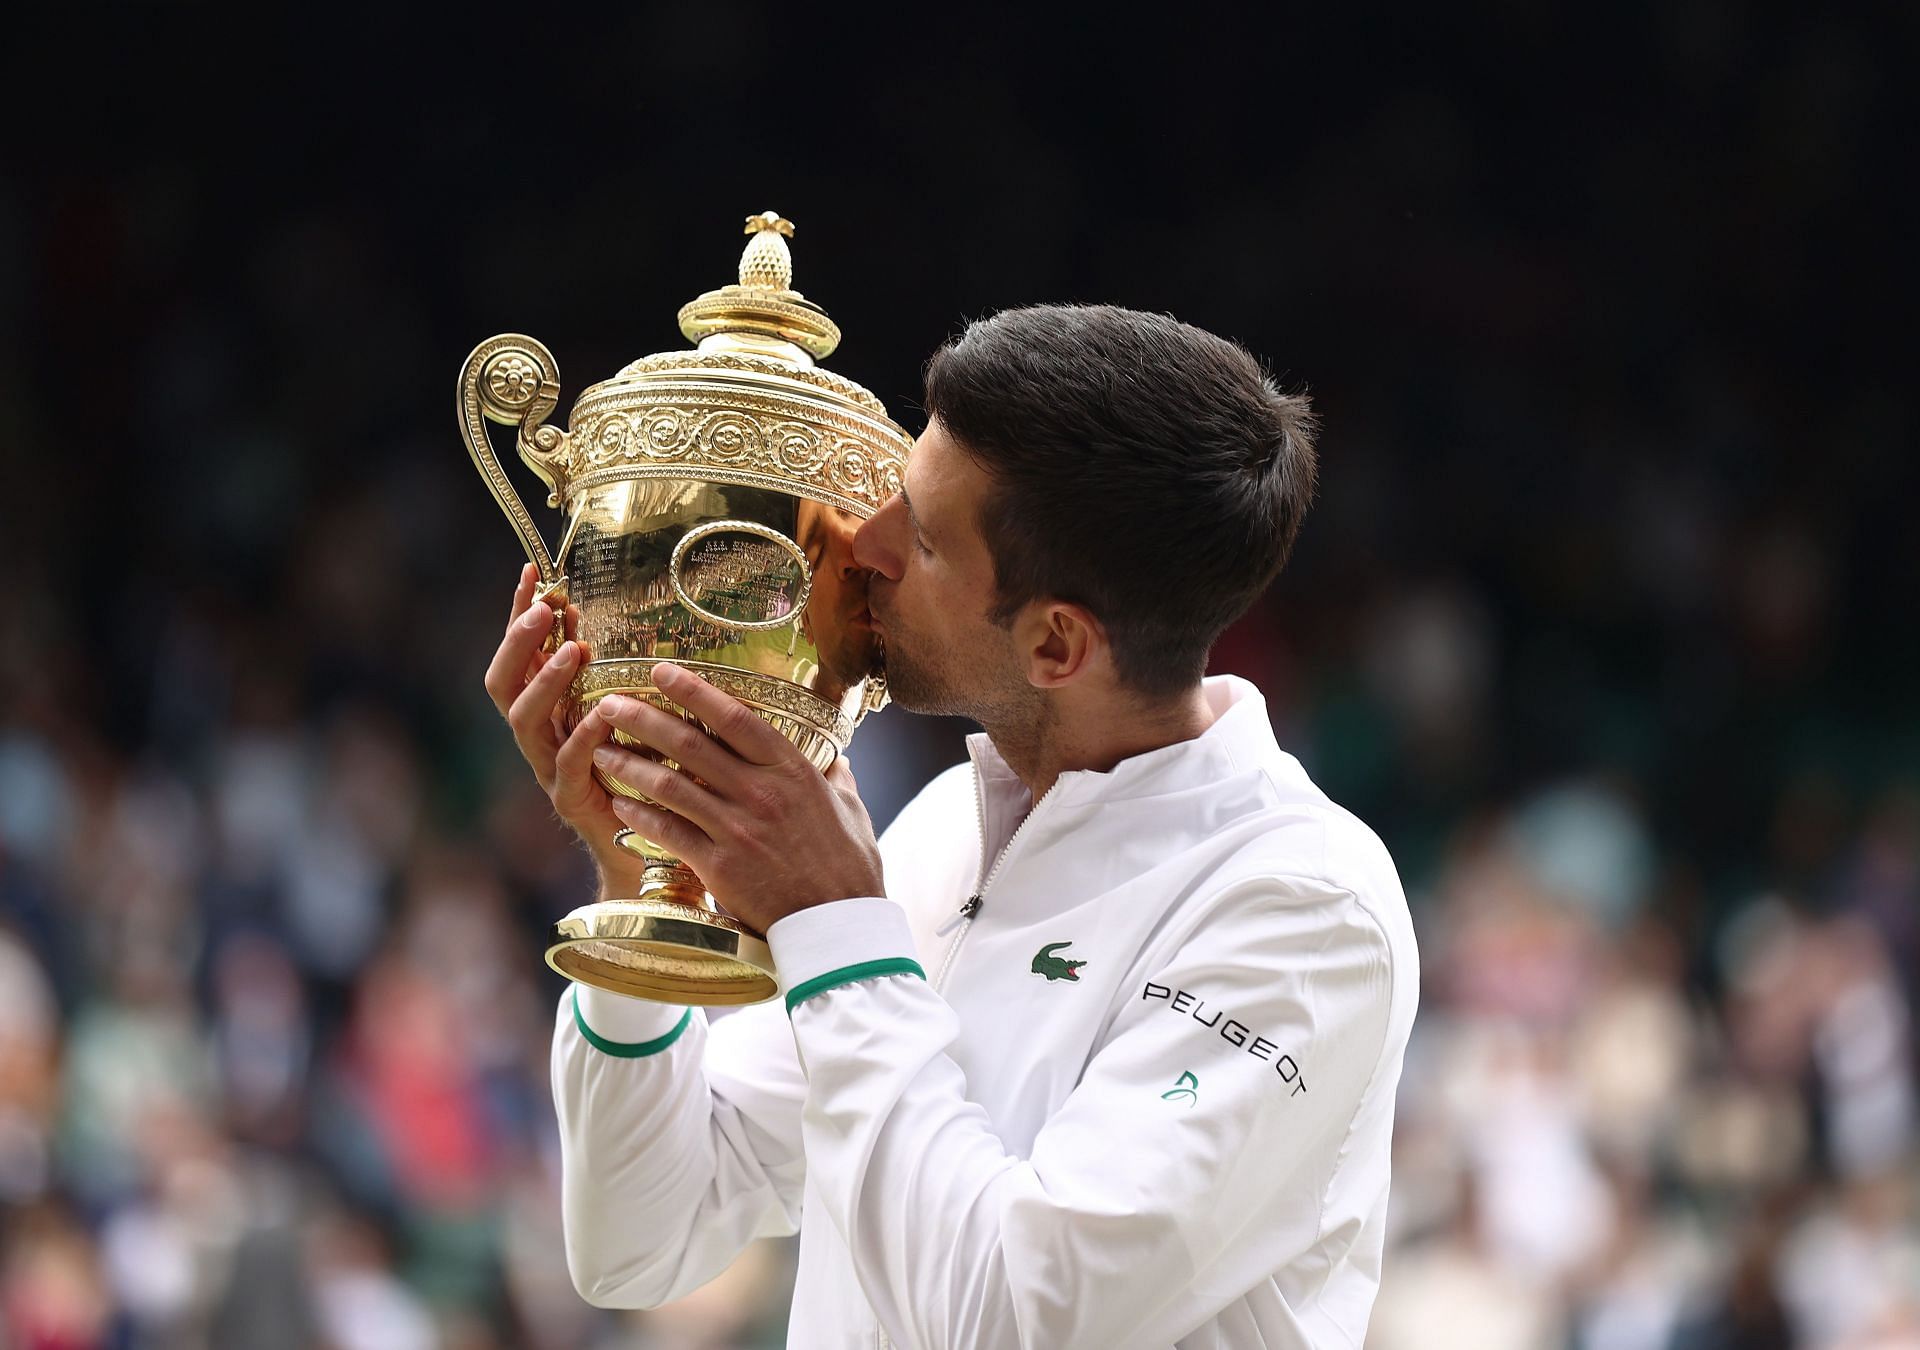 Novak Djokovic kisses the coveted Wimbledon trophy 2021. Photo by Julian Finney/Getty Images